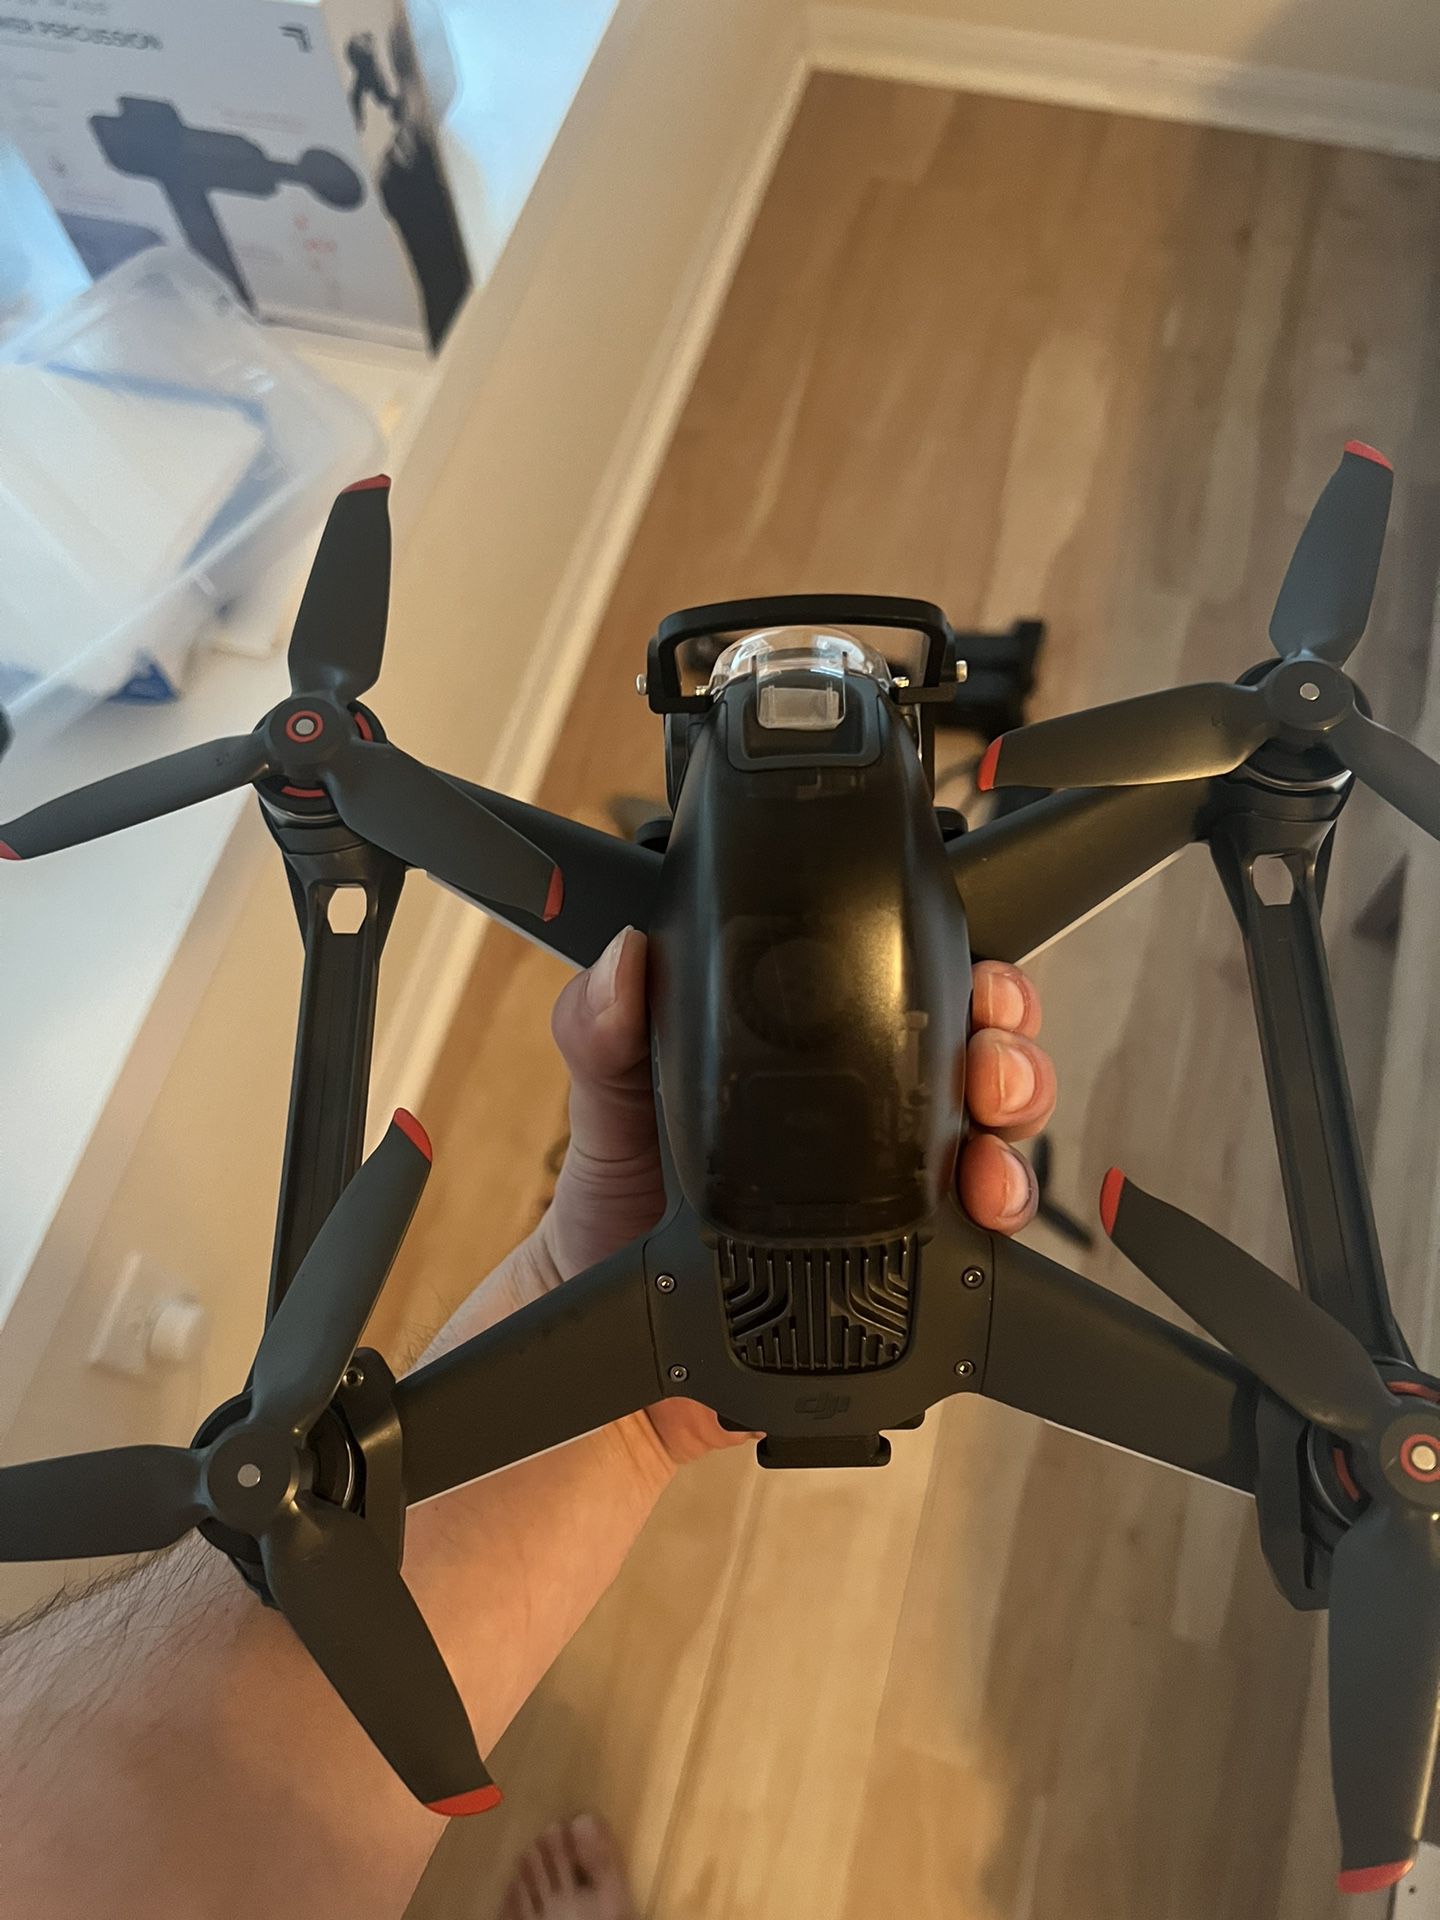 DJI FPV Drone With Goggles and 3 Batteries